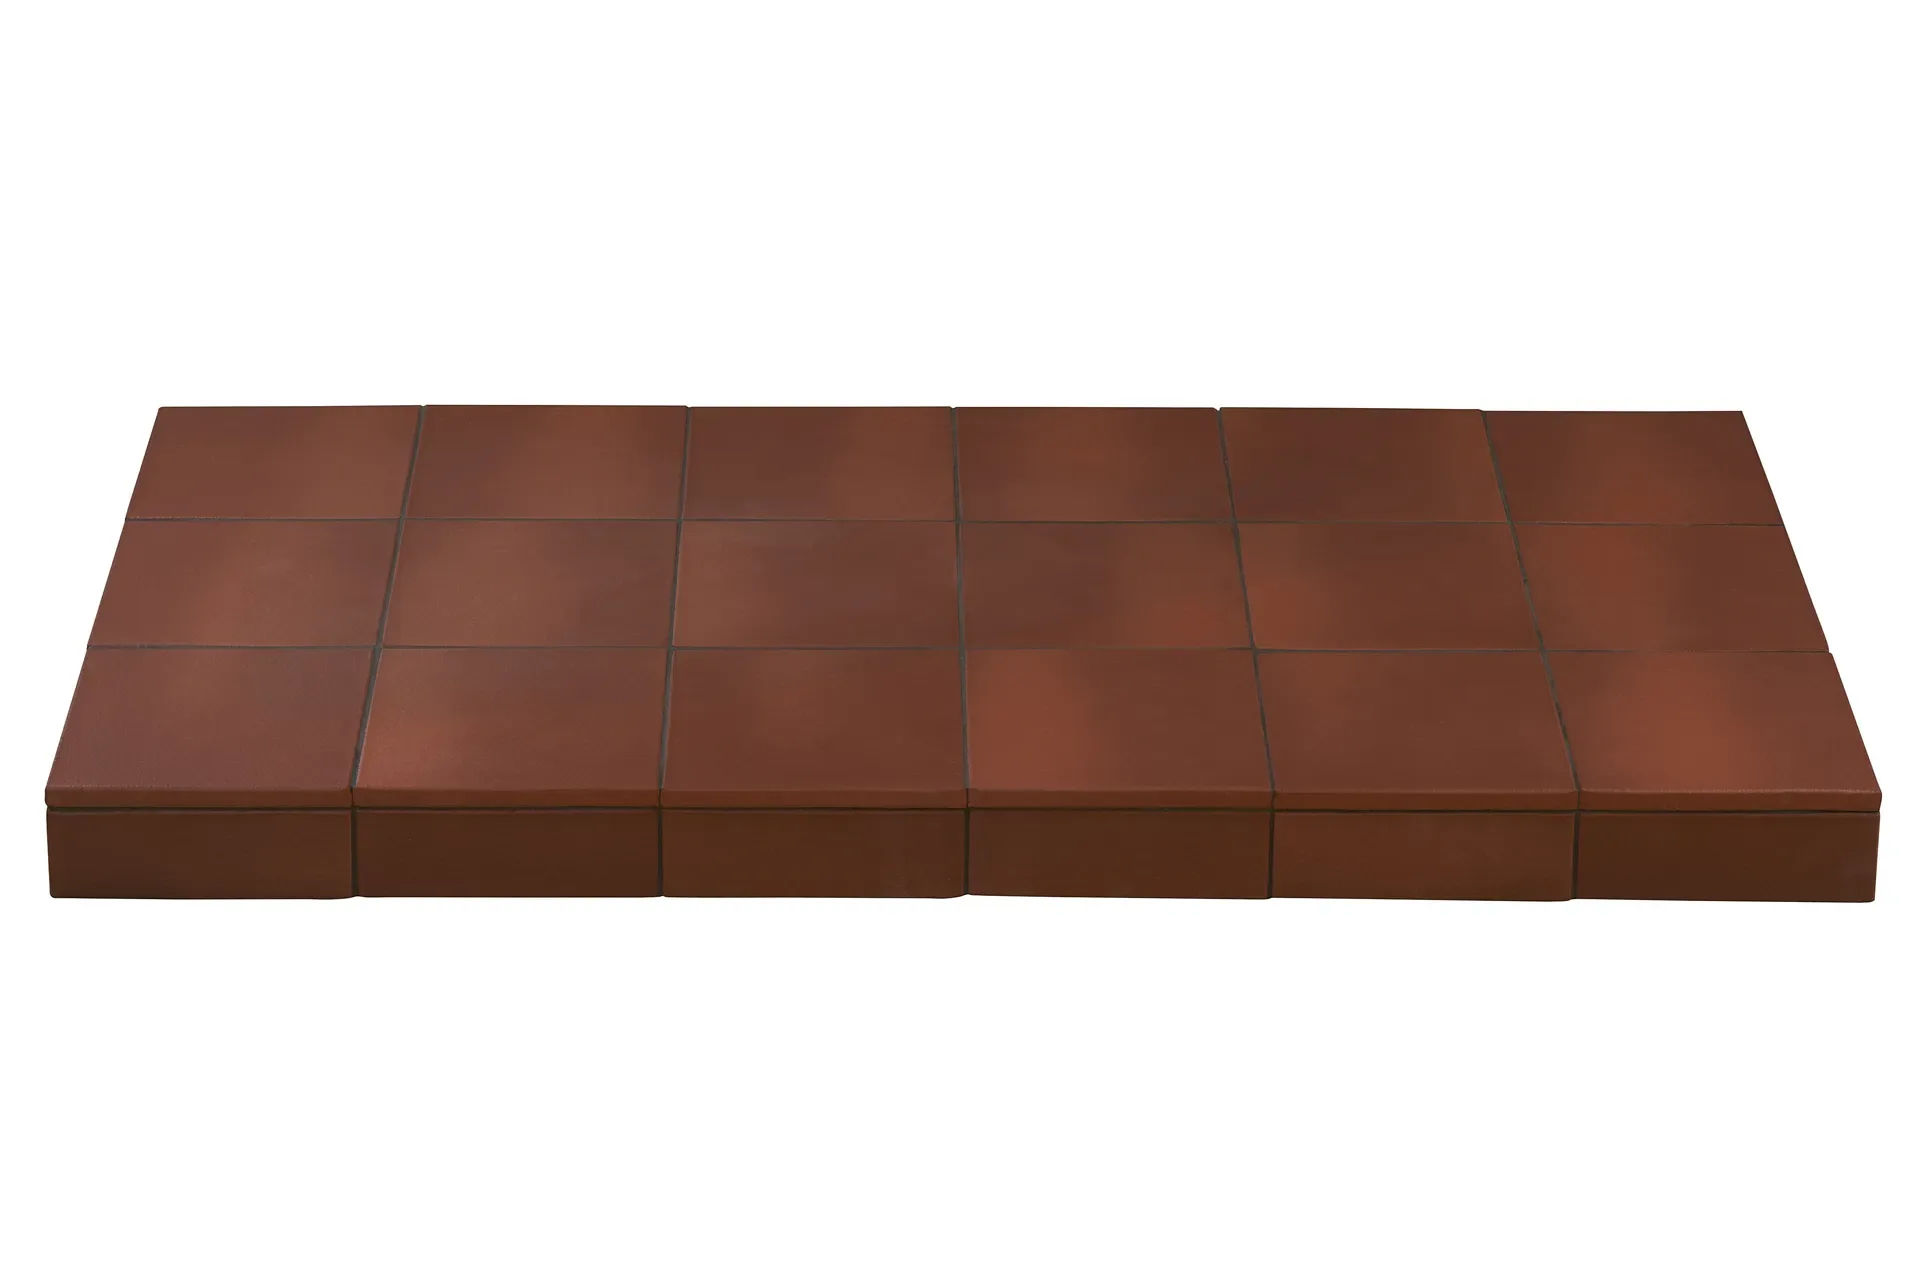 Red Quarry Tiled Hearth